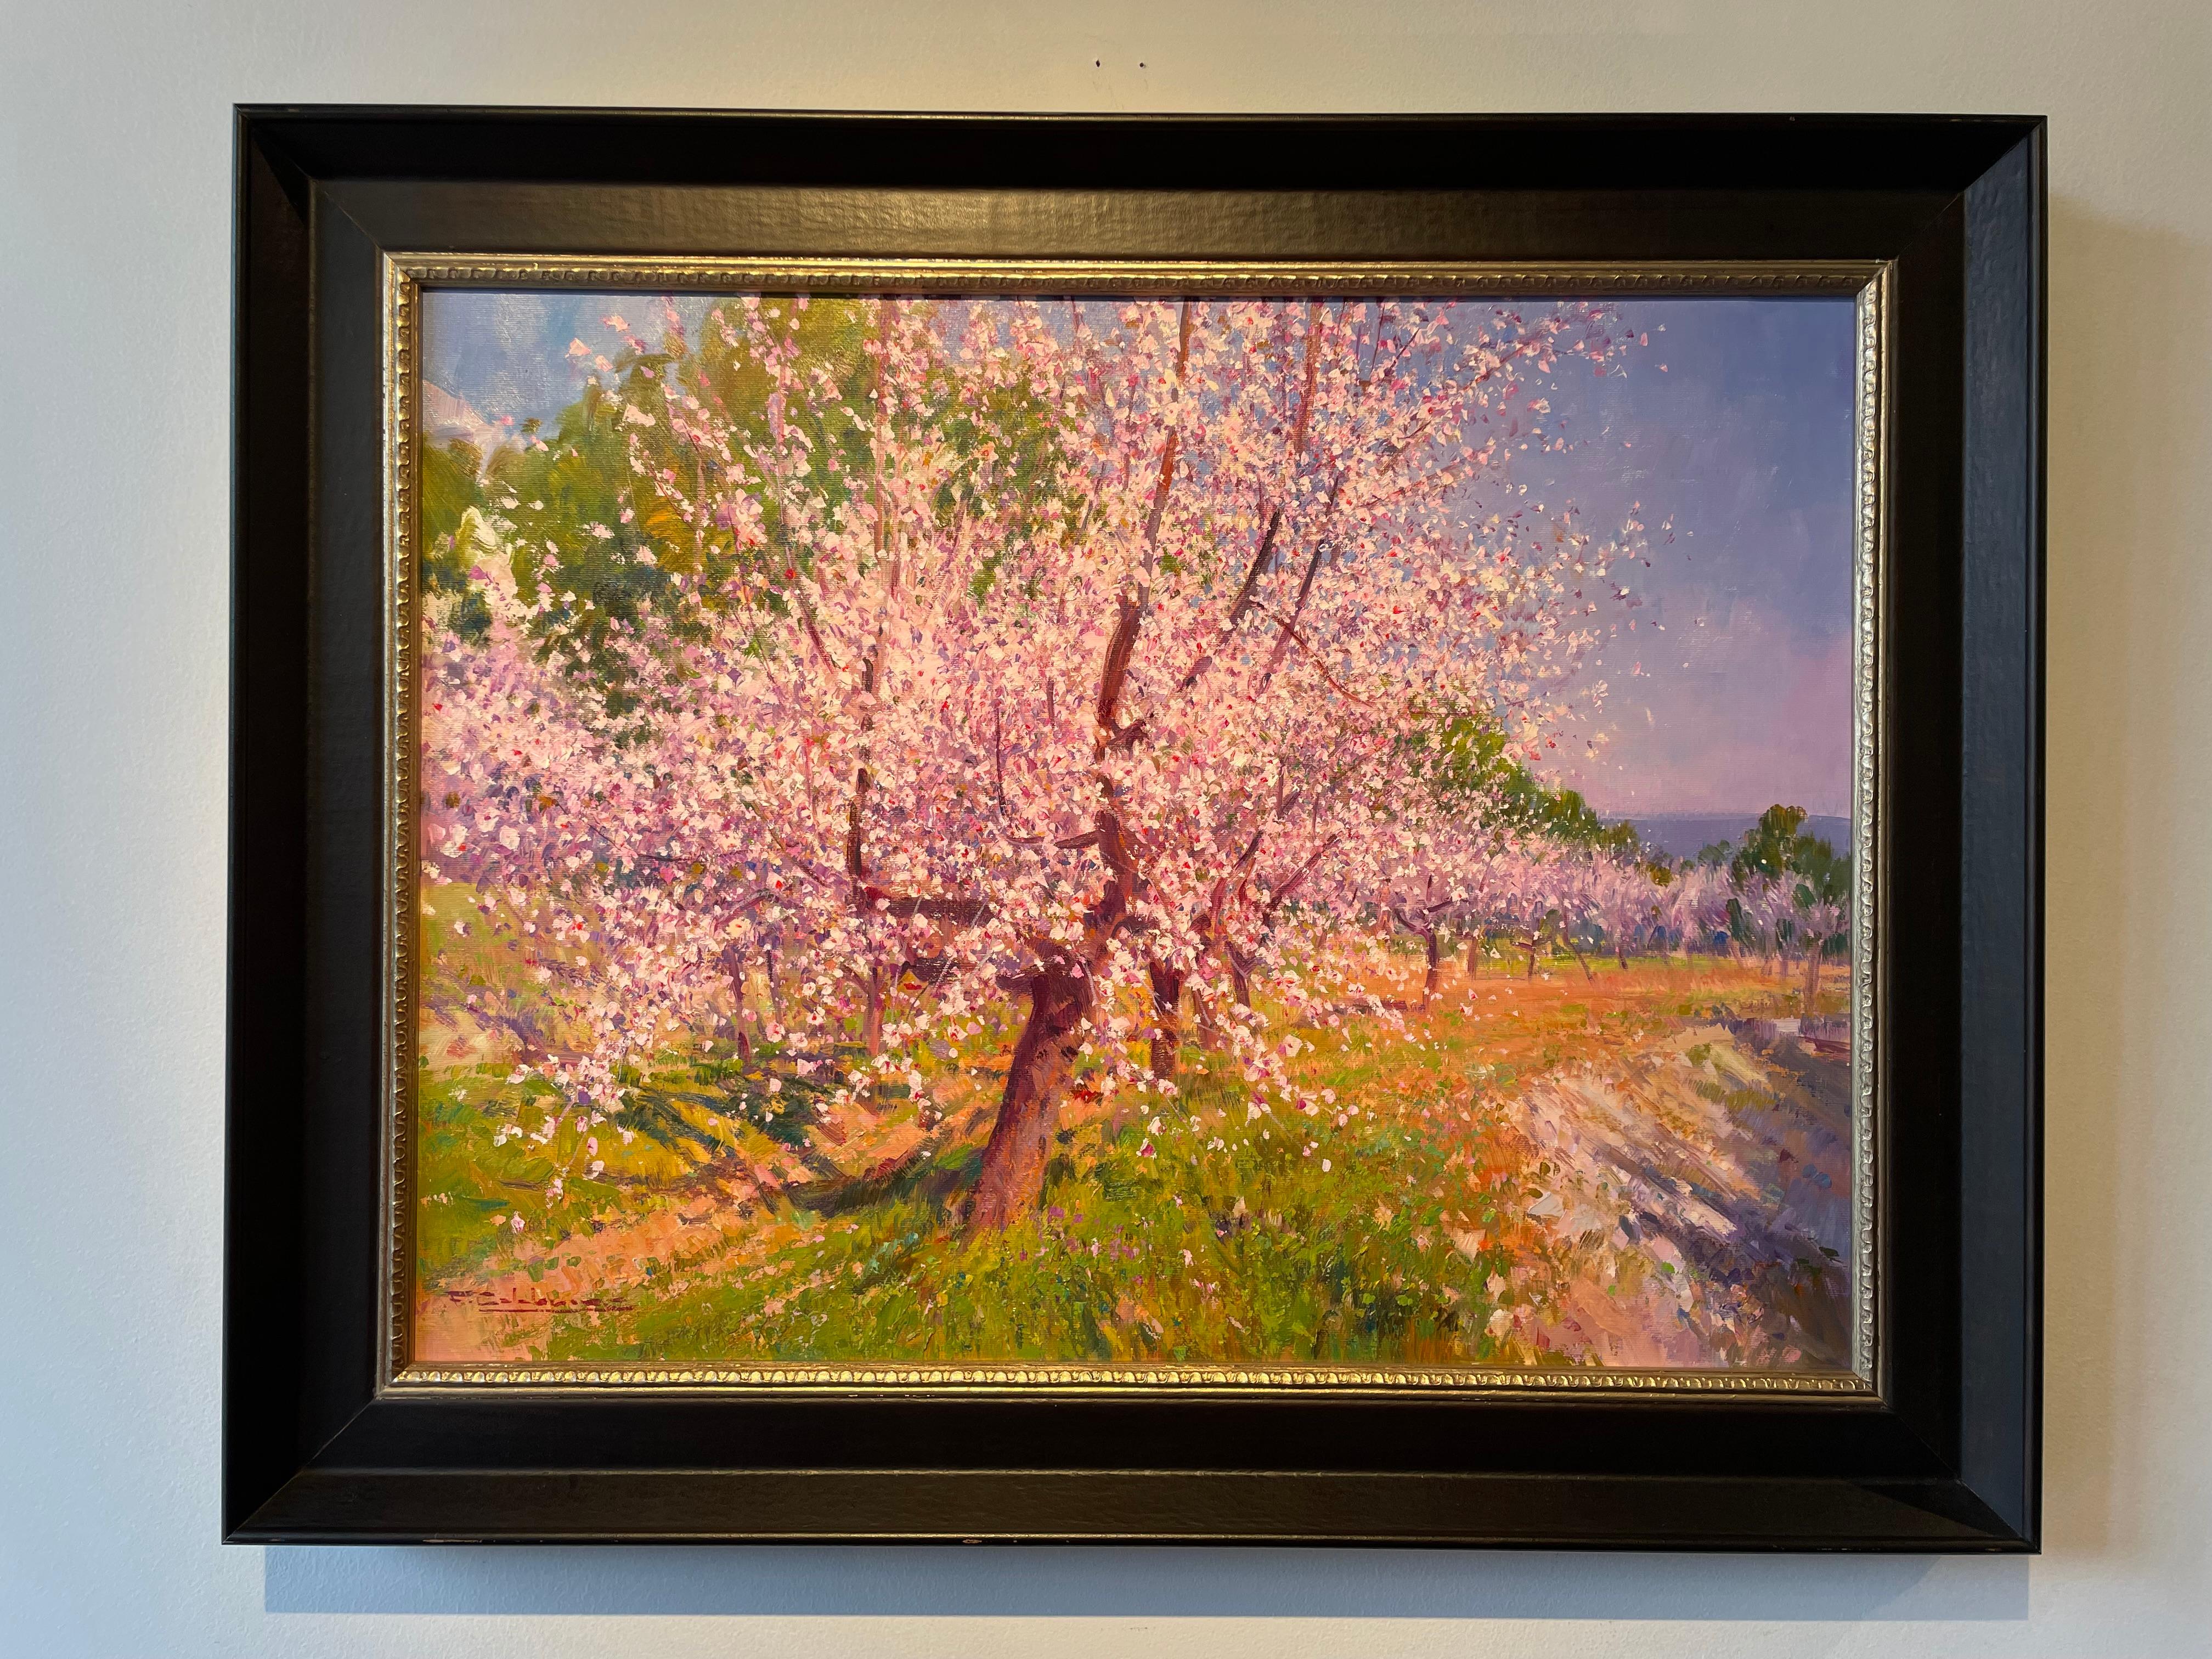 Francisco Calabuig Landscape Painting - 'Pink Blossom Trees' Contemporary Landscape painting of trees, green landscape